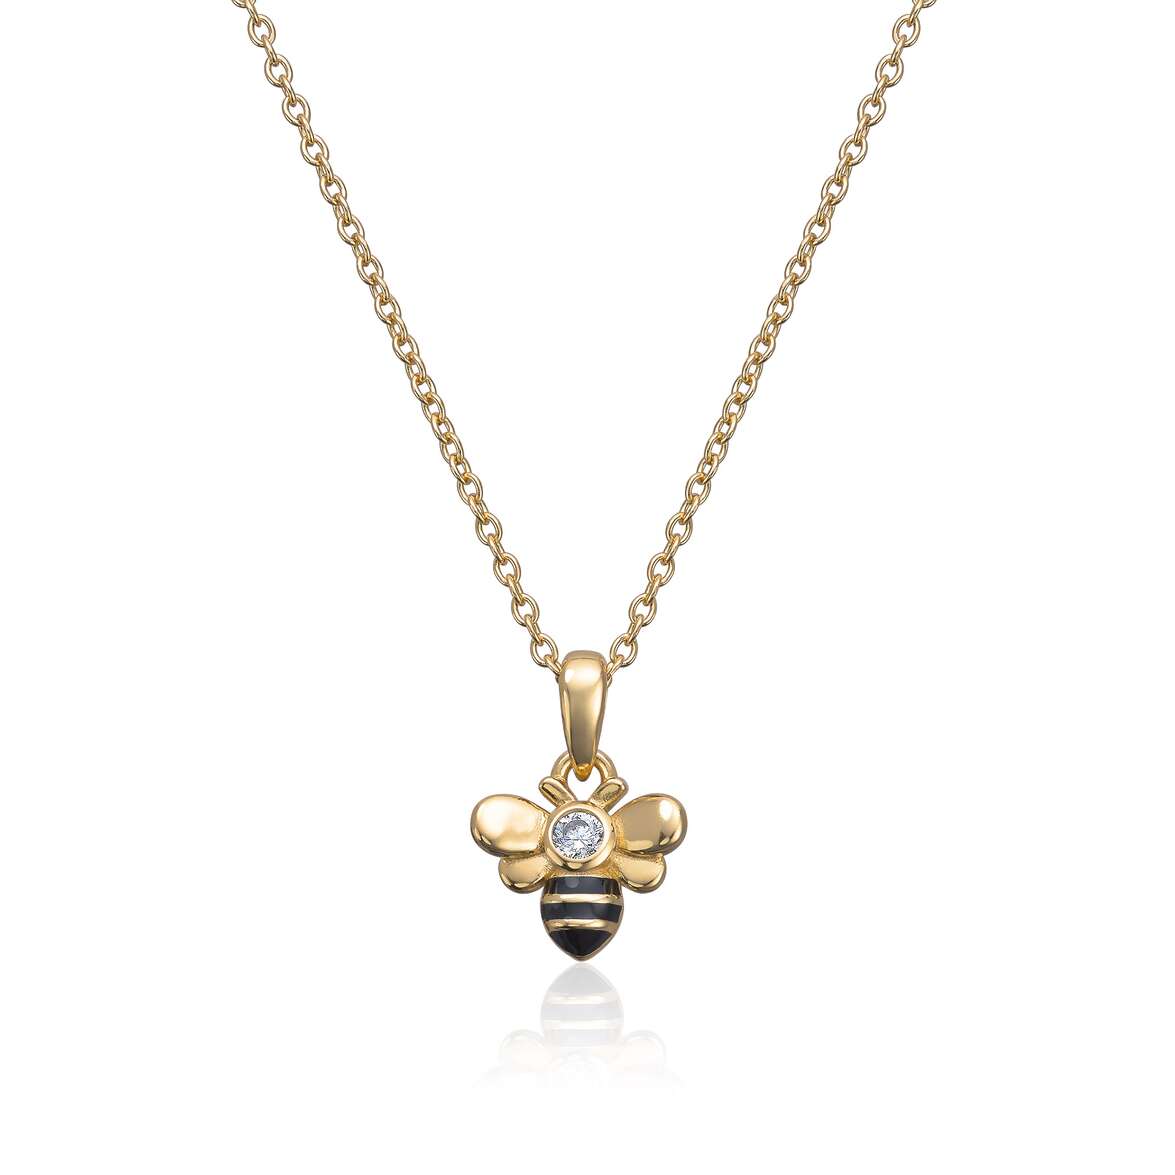 Buy our beautiful, new "Save a Bee" jewelry, and you help to preserve the Worlds bees 🐝 SDE.NO now delivers the entire collection Espeland sponsors to the Norwegian Beekeepers' Association to take care of our small pollinators.

NOK 50 of every single piece of jewelery sold goes directly to this important work. More than 90 percent of flower growths are completely dependent on honeybees to reproduce. No bees = no apples, nuts, oranges, lemons, melons, berries, broccoli or squash. Without the diligent bees, crops around the world will do very poorly!

Save a Bee today, our best friends among the insects ❤️